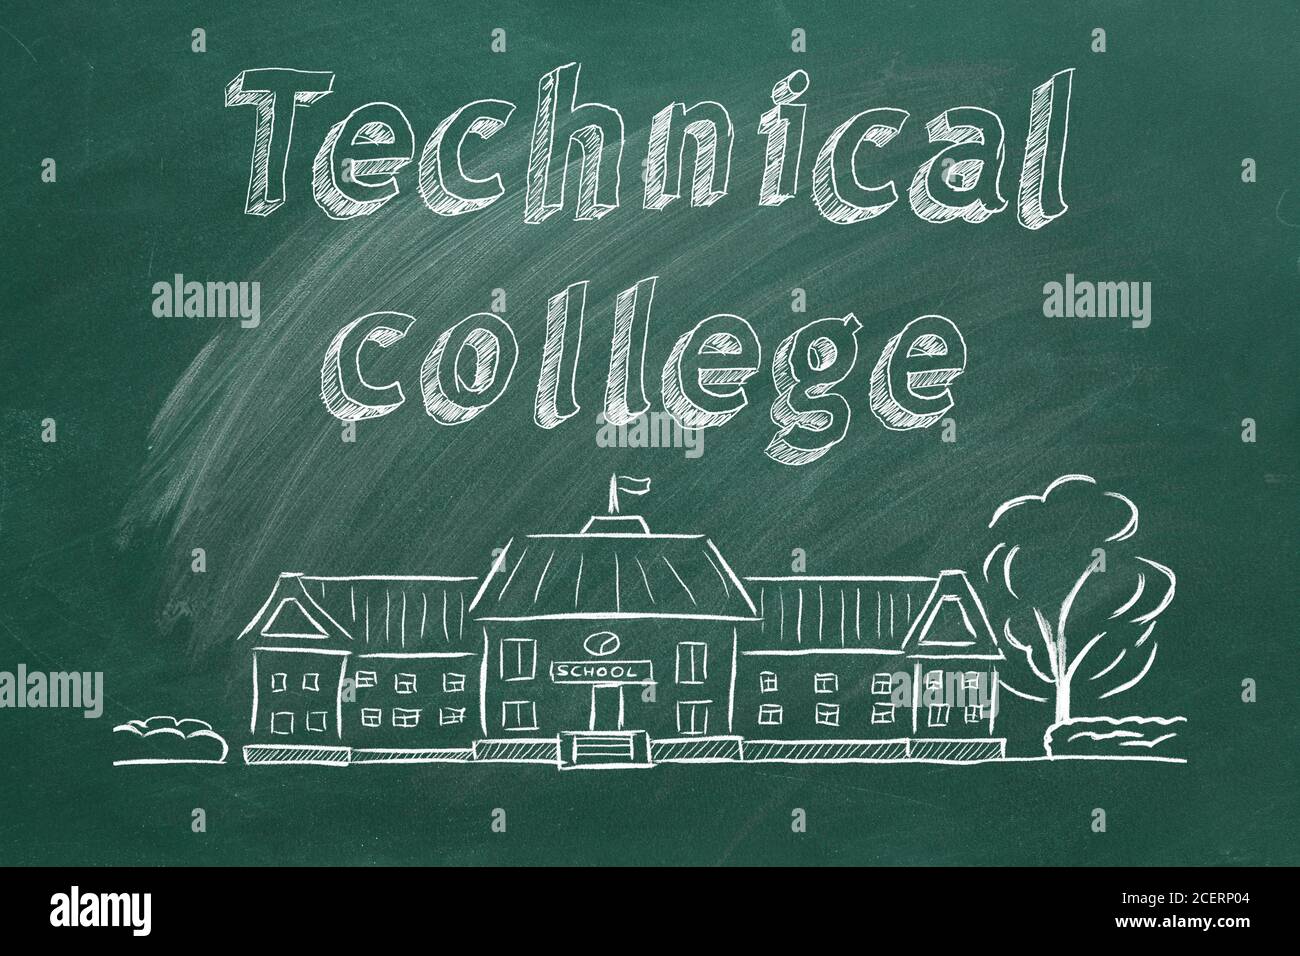 School building  and lettering Technical college on blackboard. Hand drawn sketch. Stock Photo